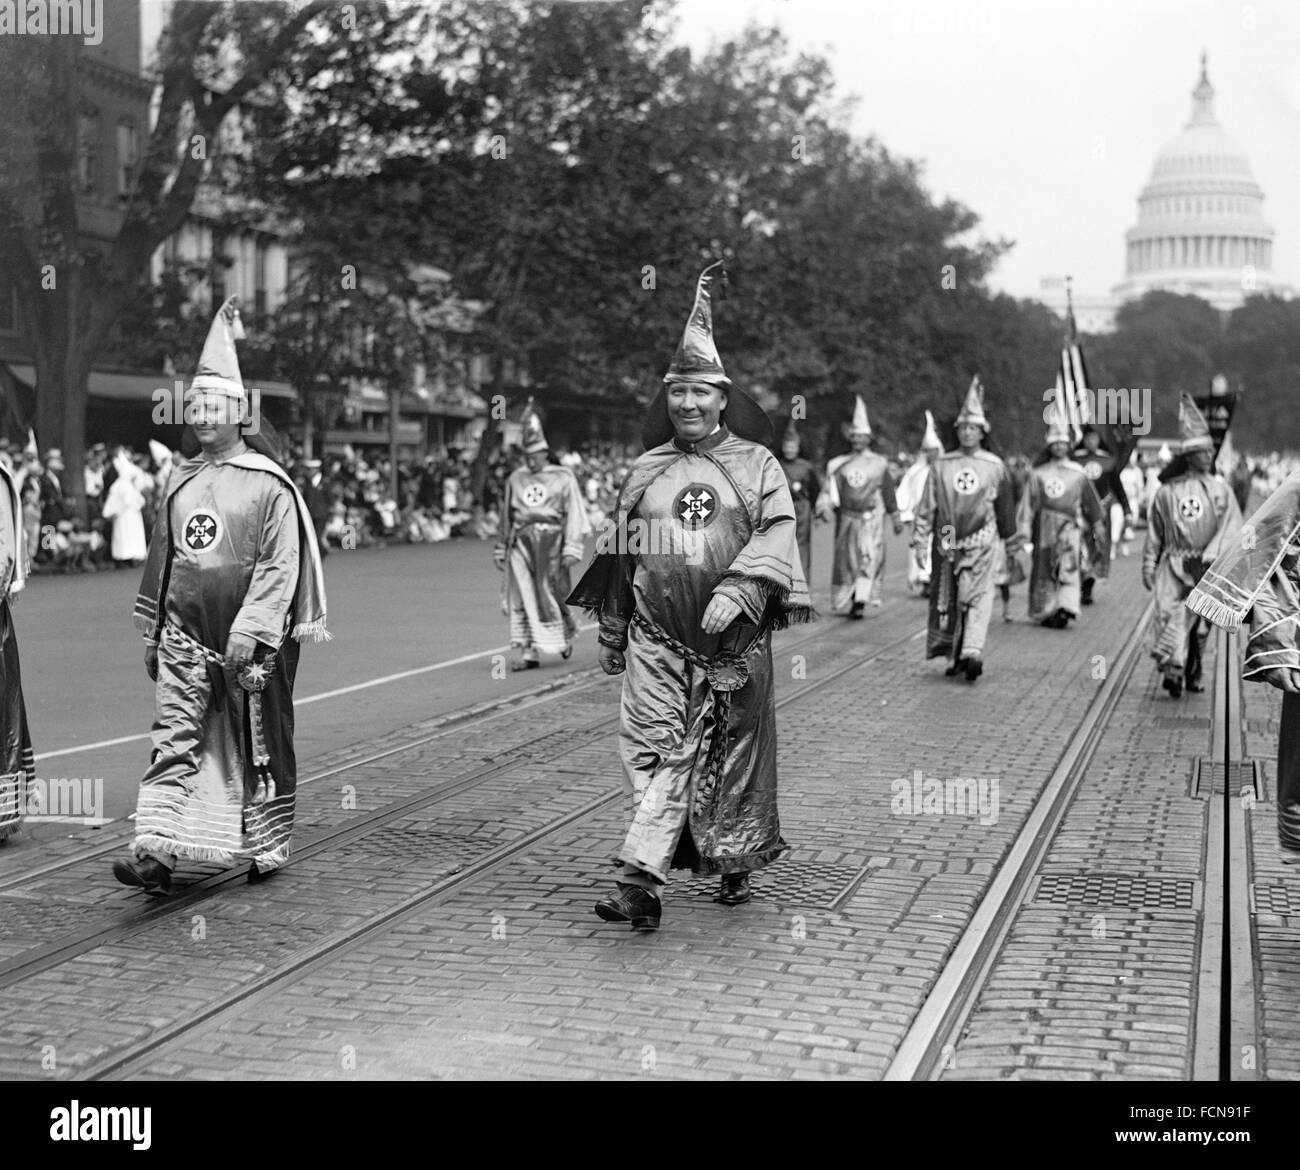 Ku Klux Klan. Hiram Wesley Evans (centre), Grand Wizard of the Ku Klux Klan from 1922 to 1939, leading a march down Pennsylvania Avenue in Washington DC on 13th September 1926 Stock Photo